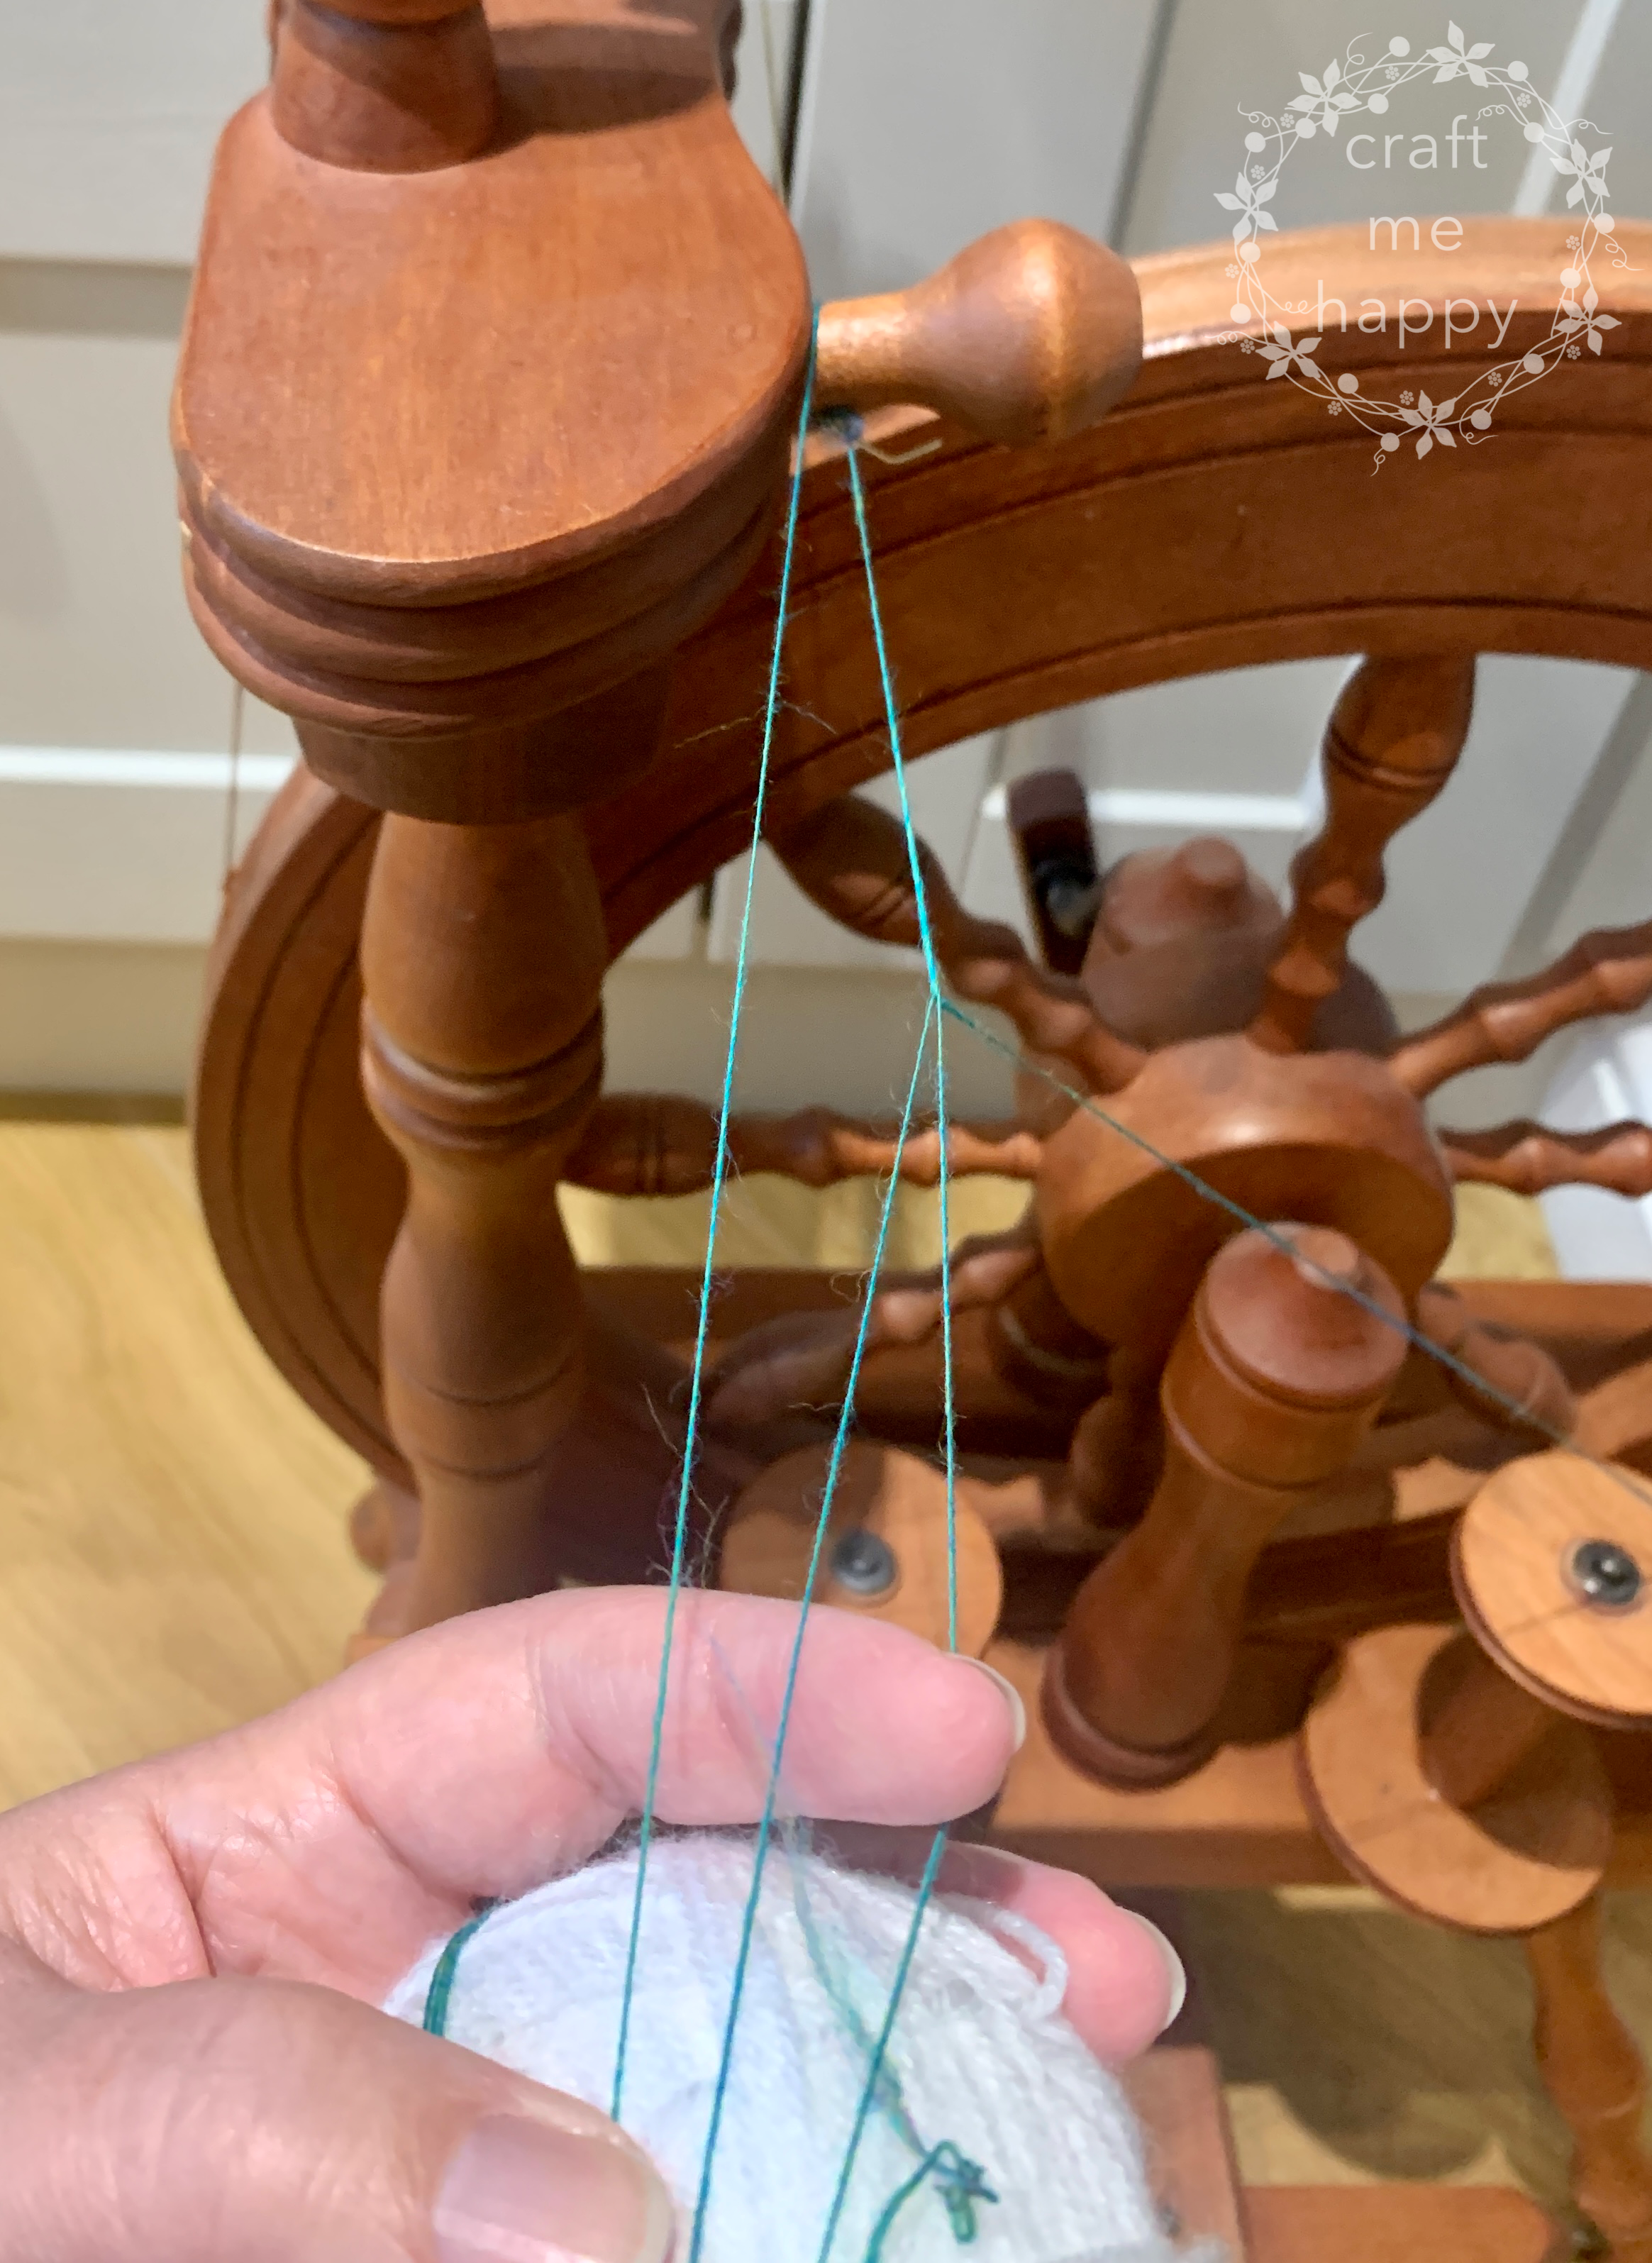 Craft me Happy!: Chain Plying at the Wheel - Versus - Making a